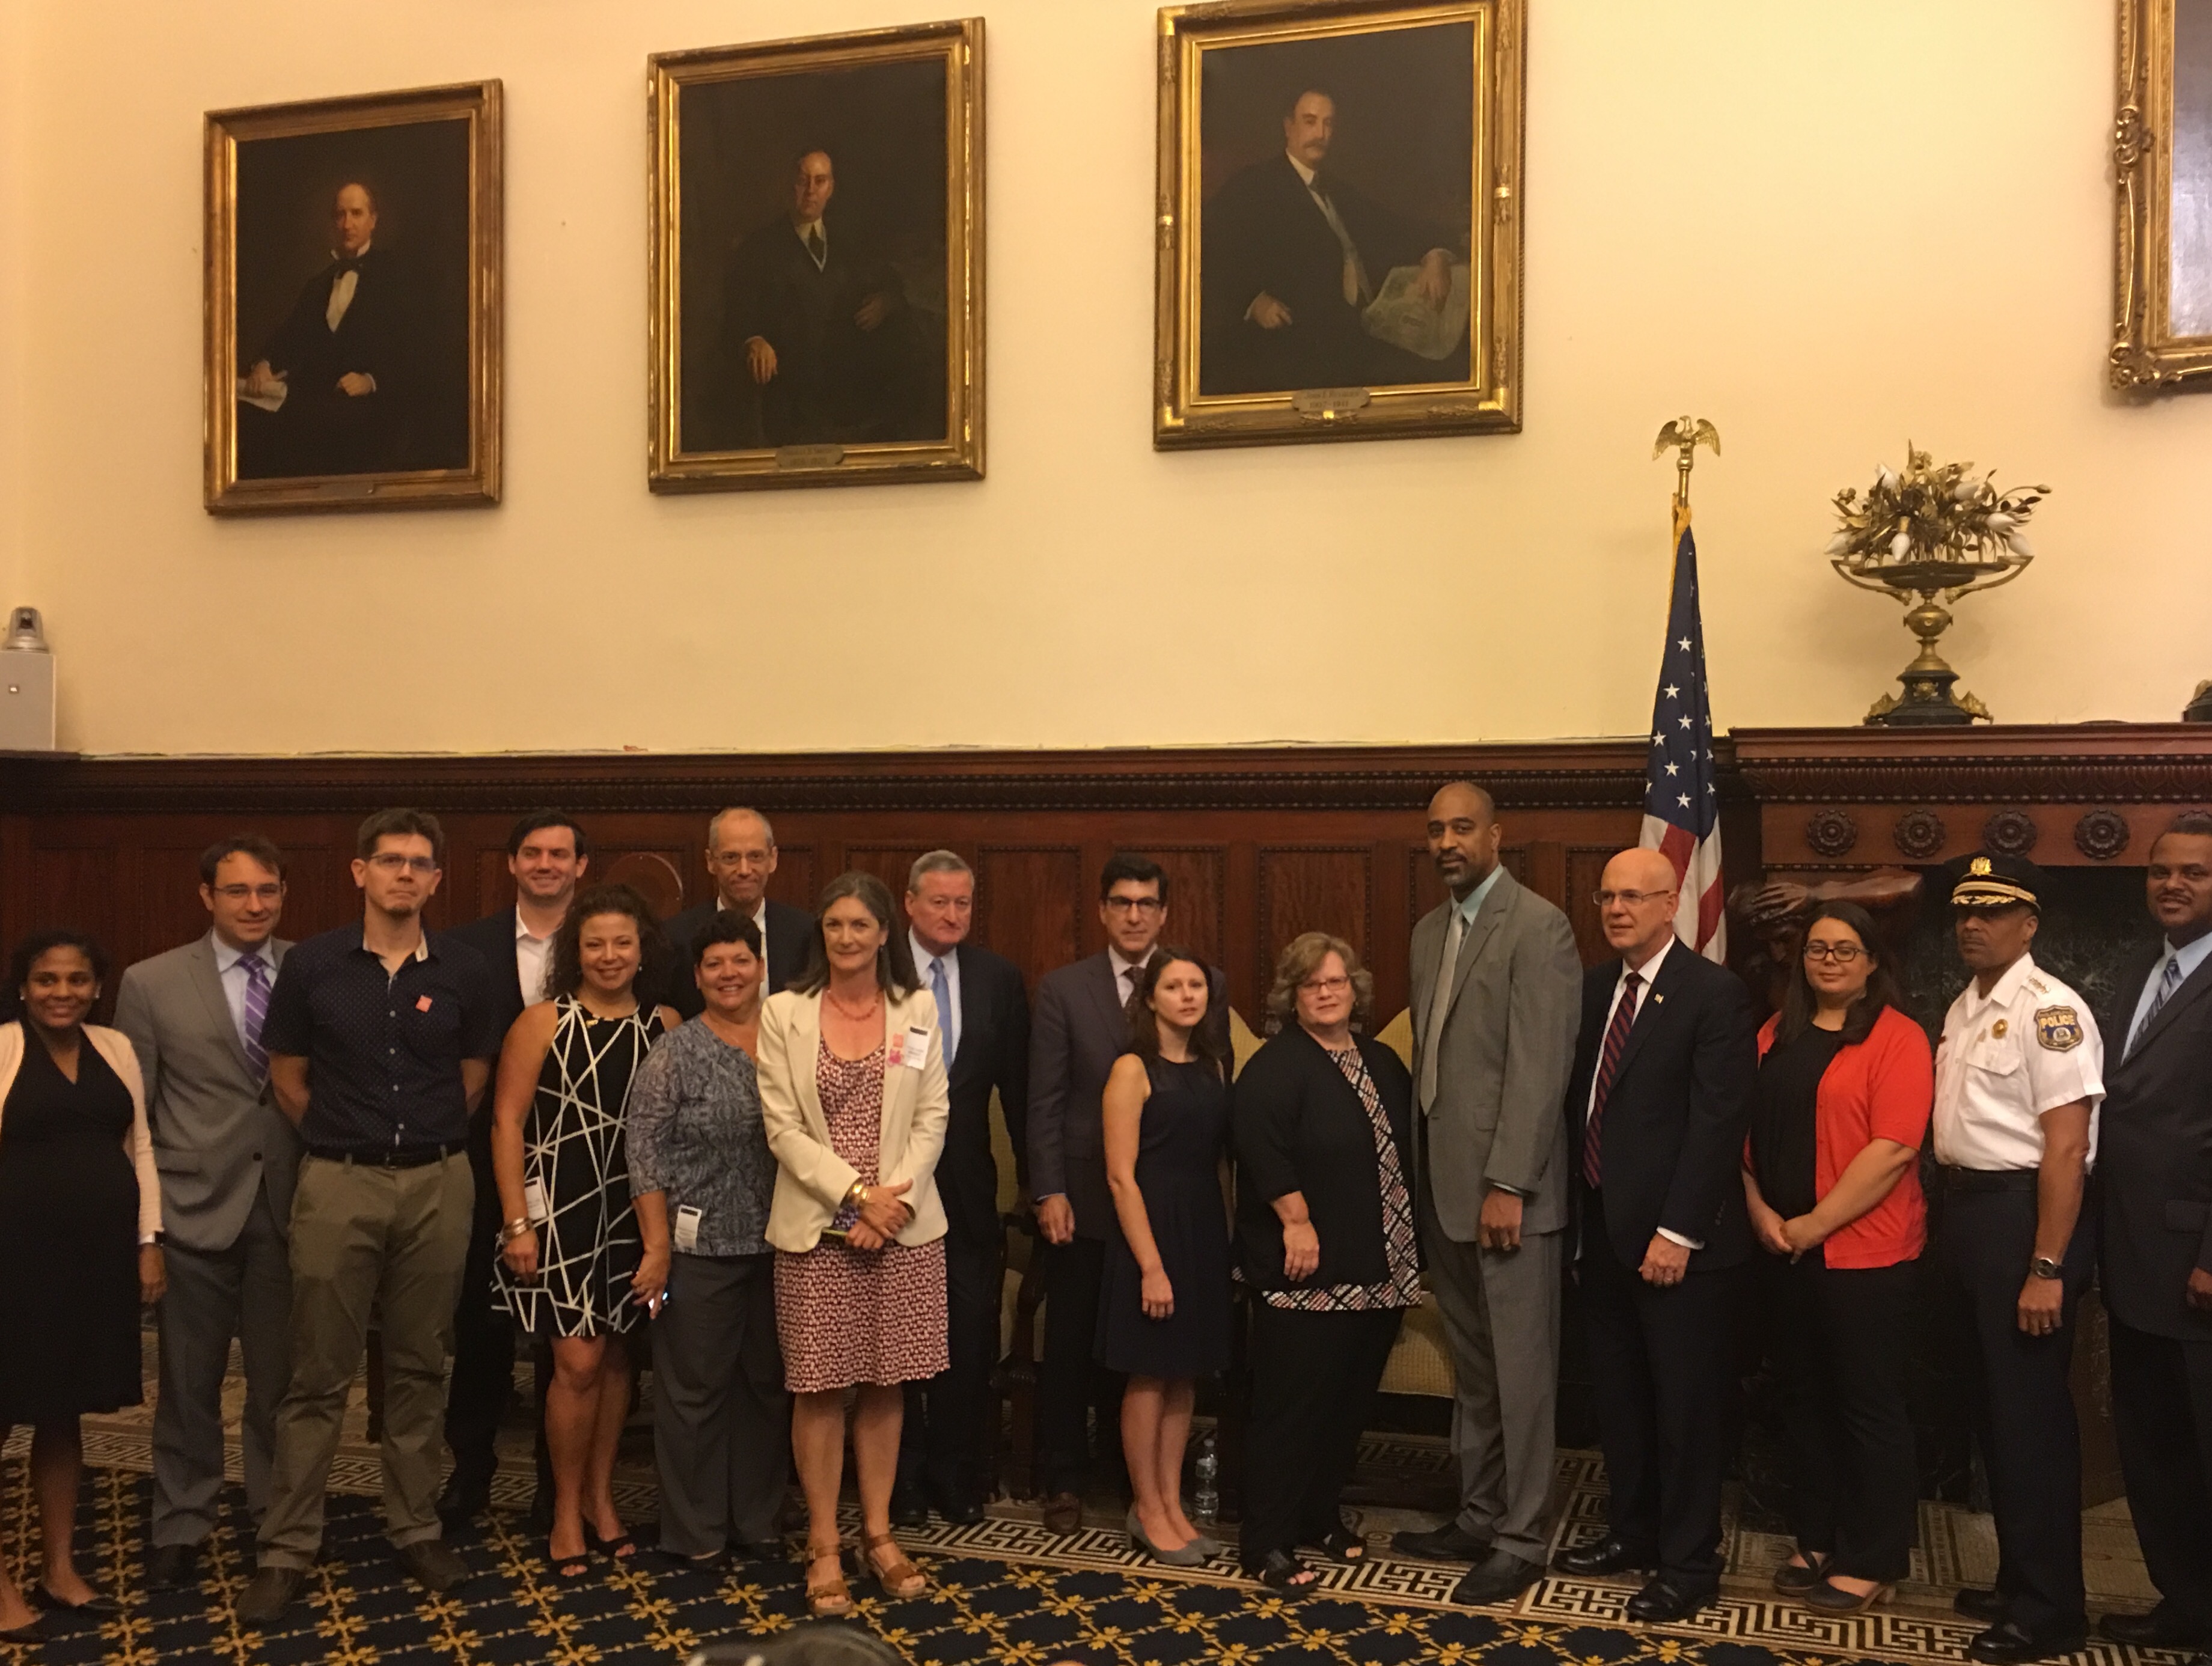 Mayor Jim Kenney poses with the Vision Zero Task Force. Not pictured: A single member of City Council